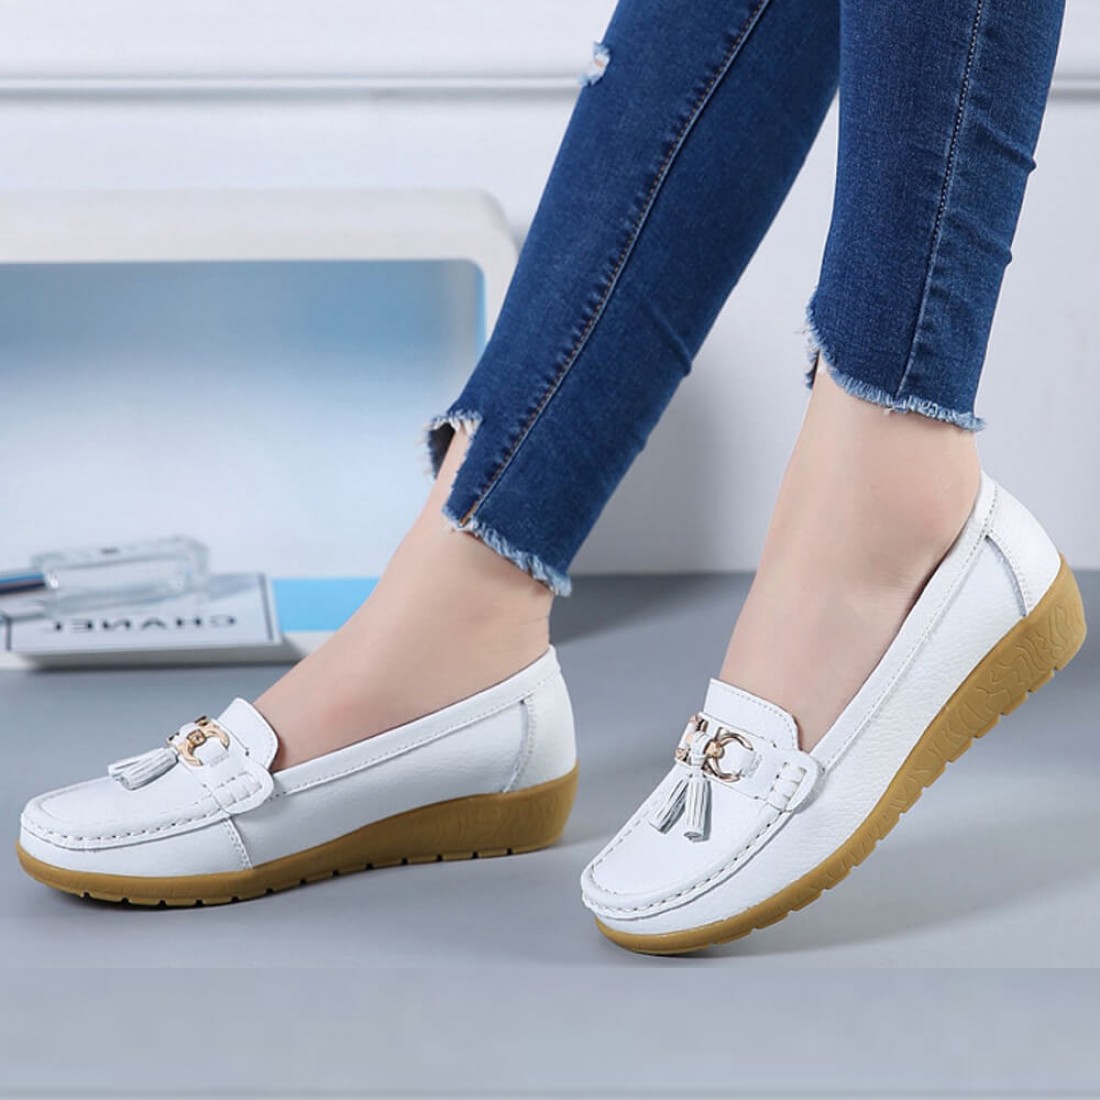 Buy Fashionable Round Toe Soft Rubber Sole Flat Shoes-White | Look ...